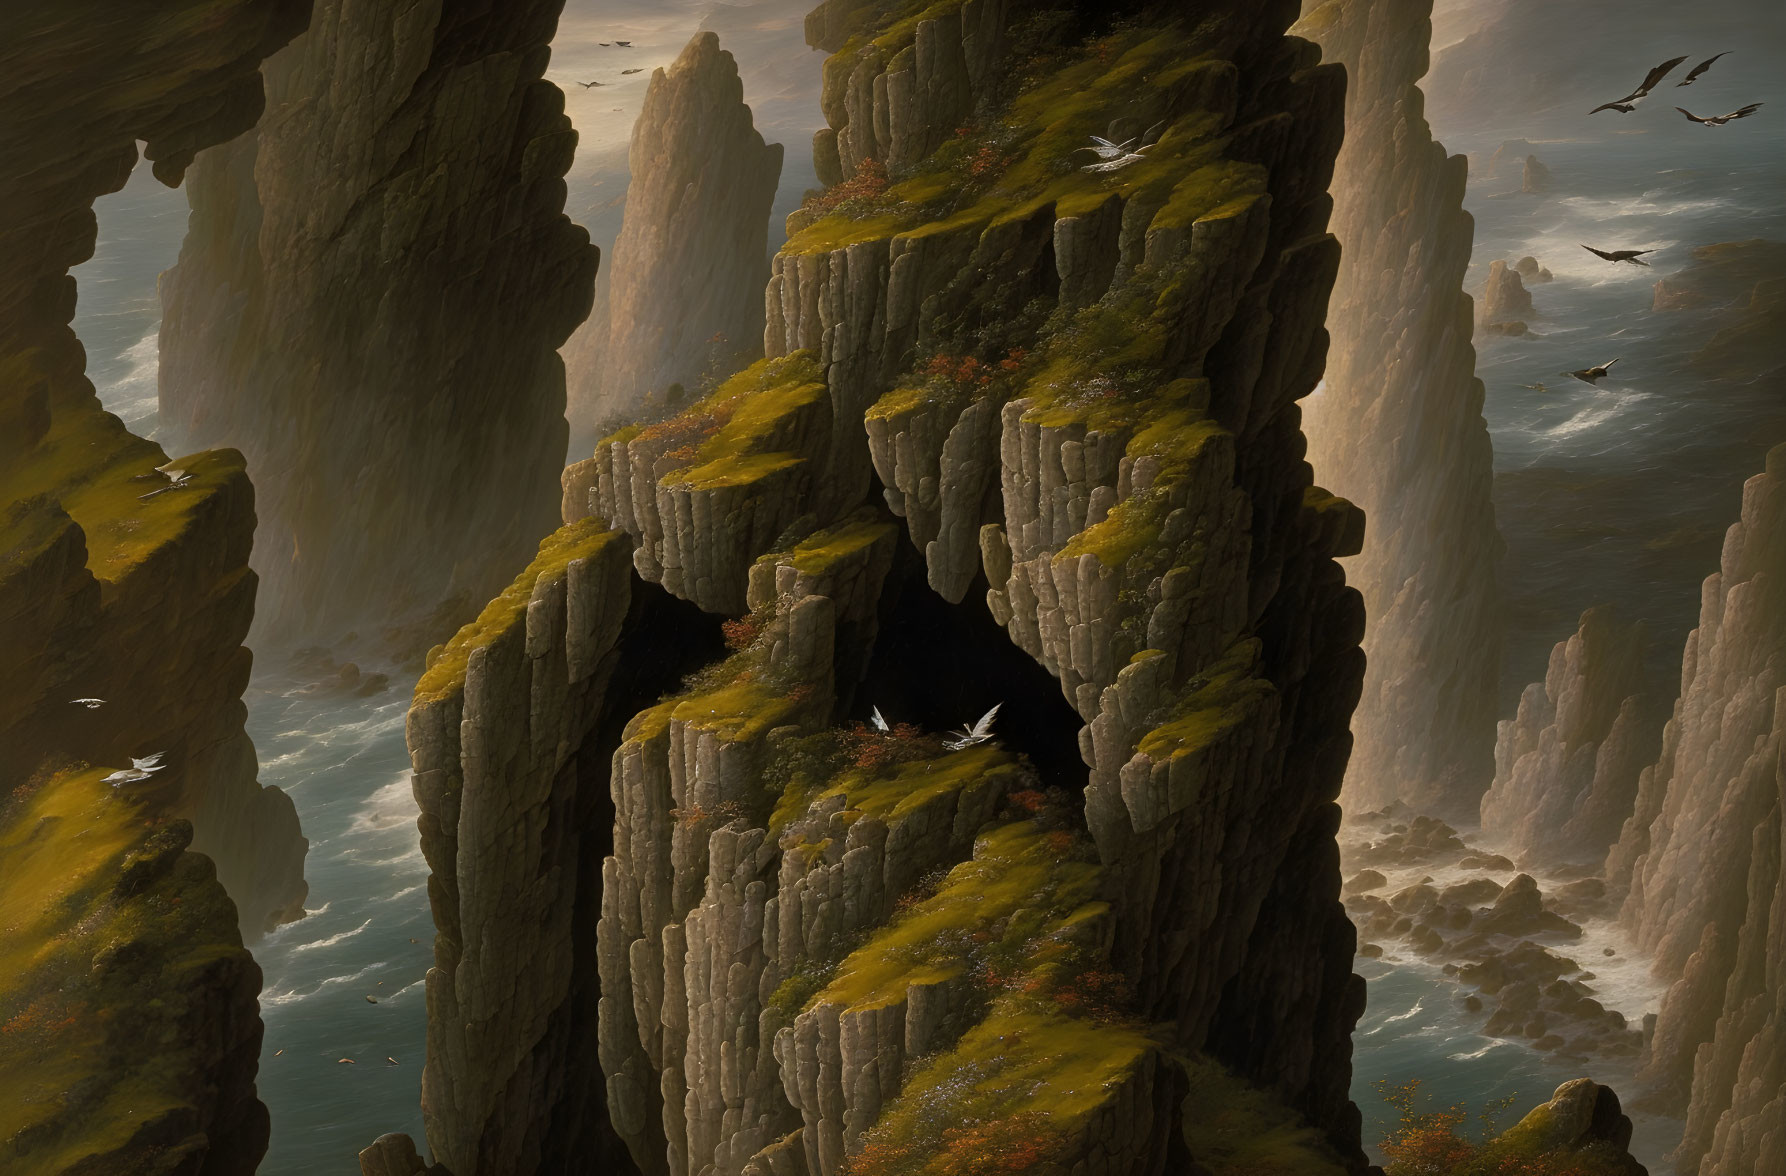 Steep rocky cliffs with greenery and soaring birds in misty sunlight